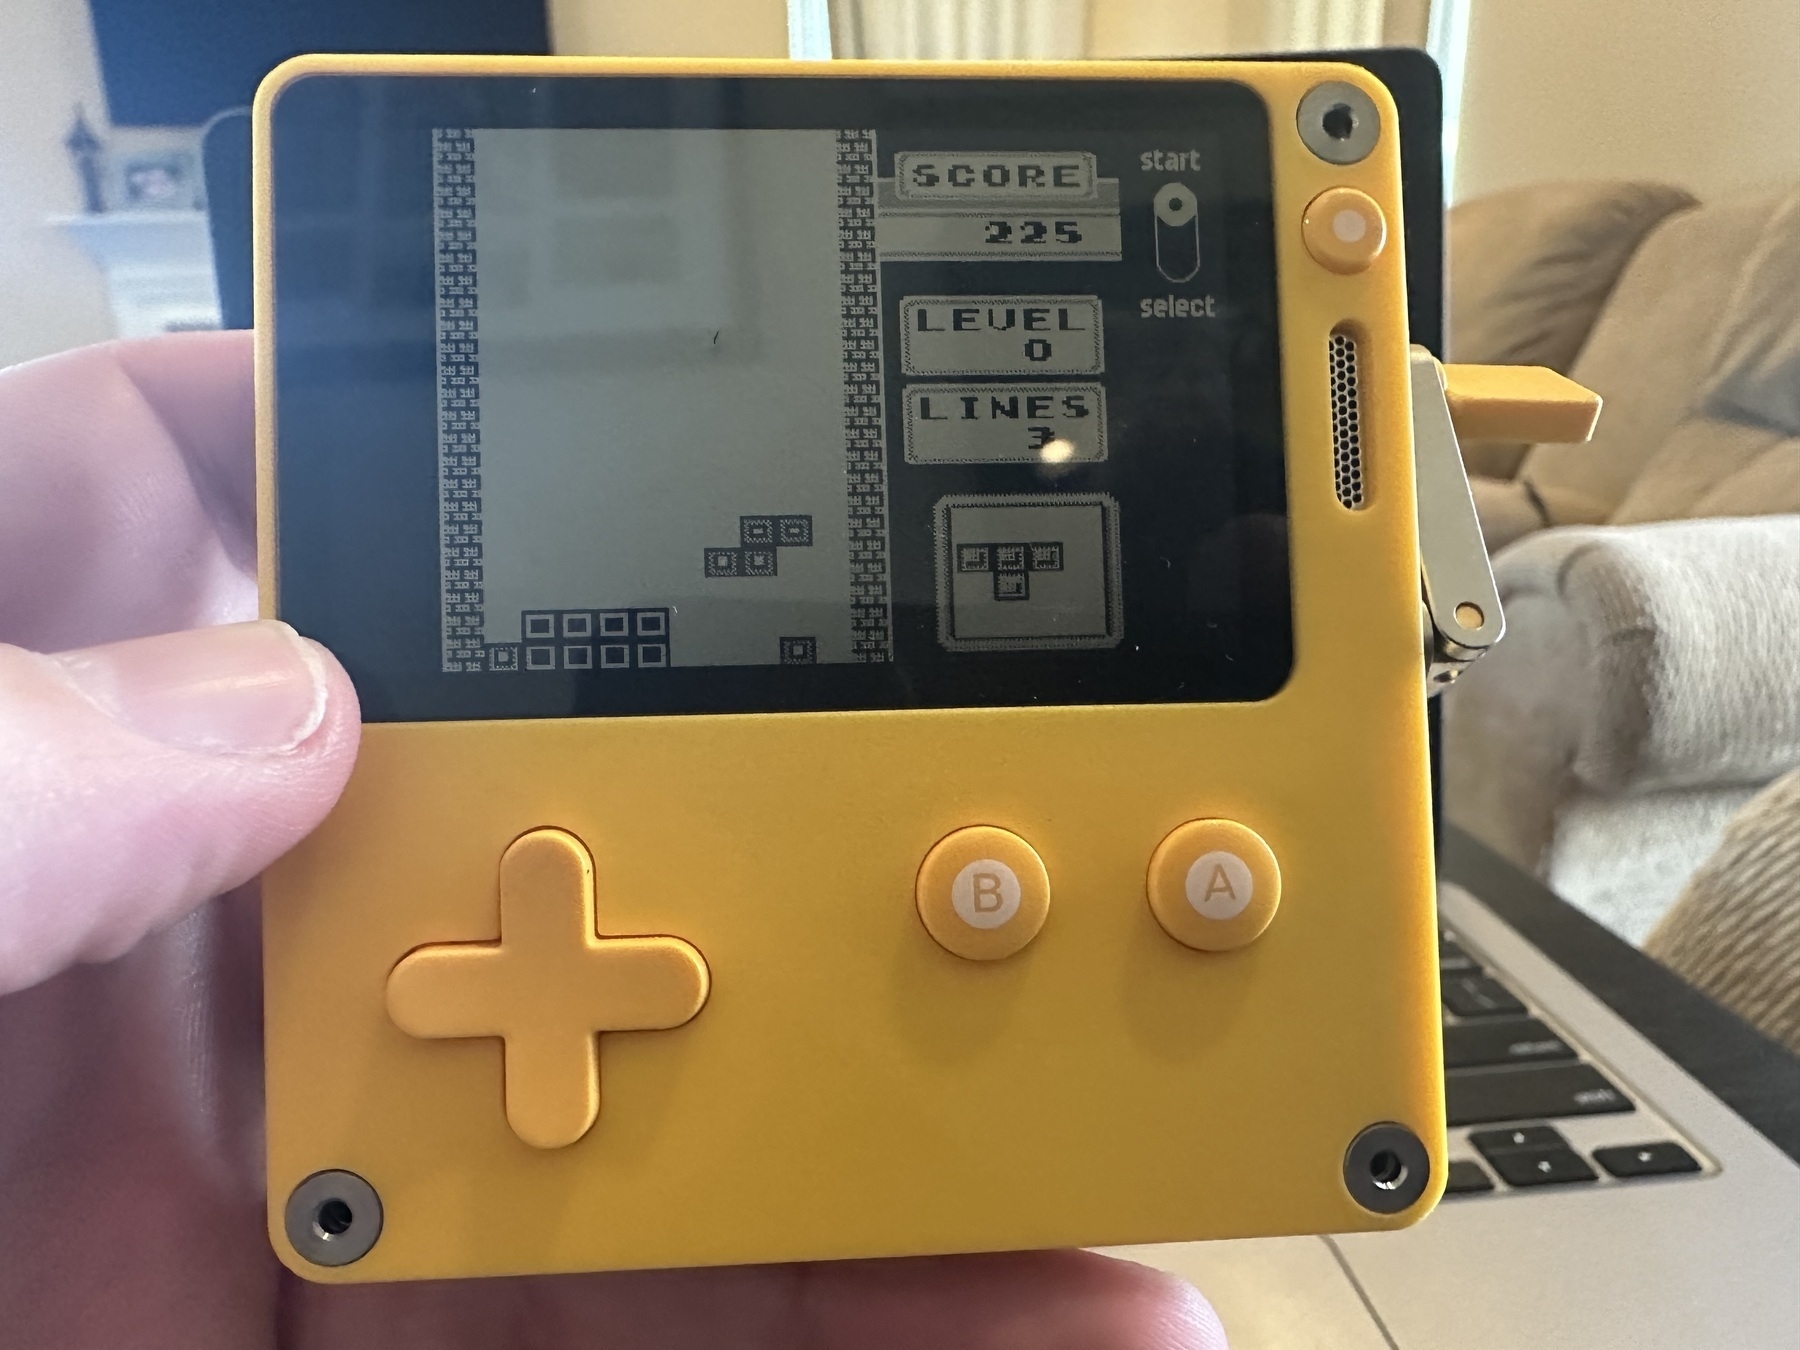 A yellow handheld gaming system with a grayscale screen running the original Nintendo Gameboy version of Tetris